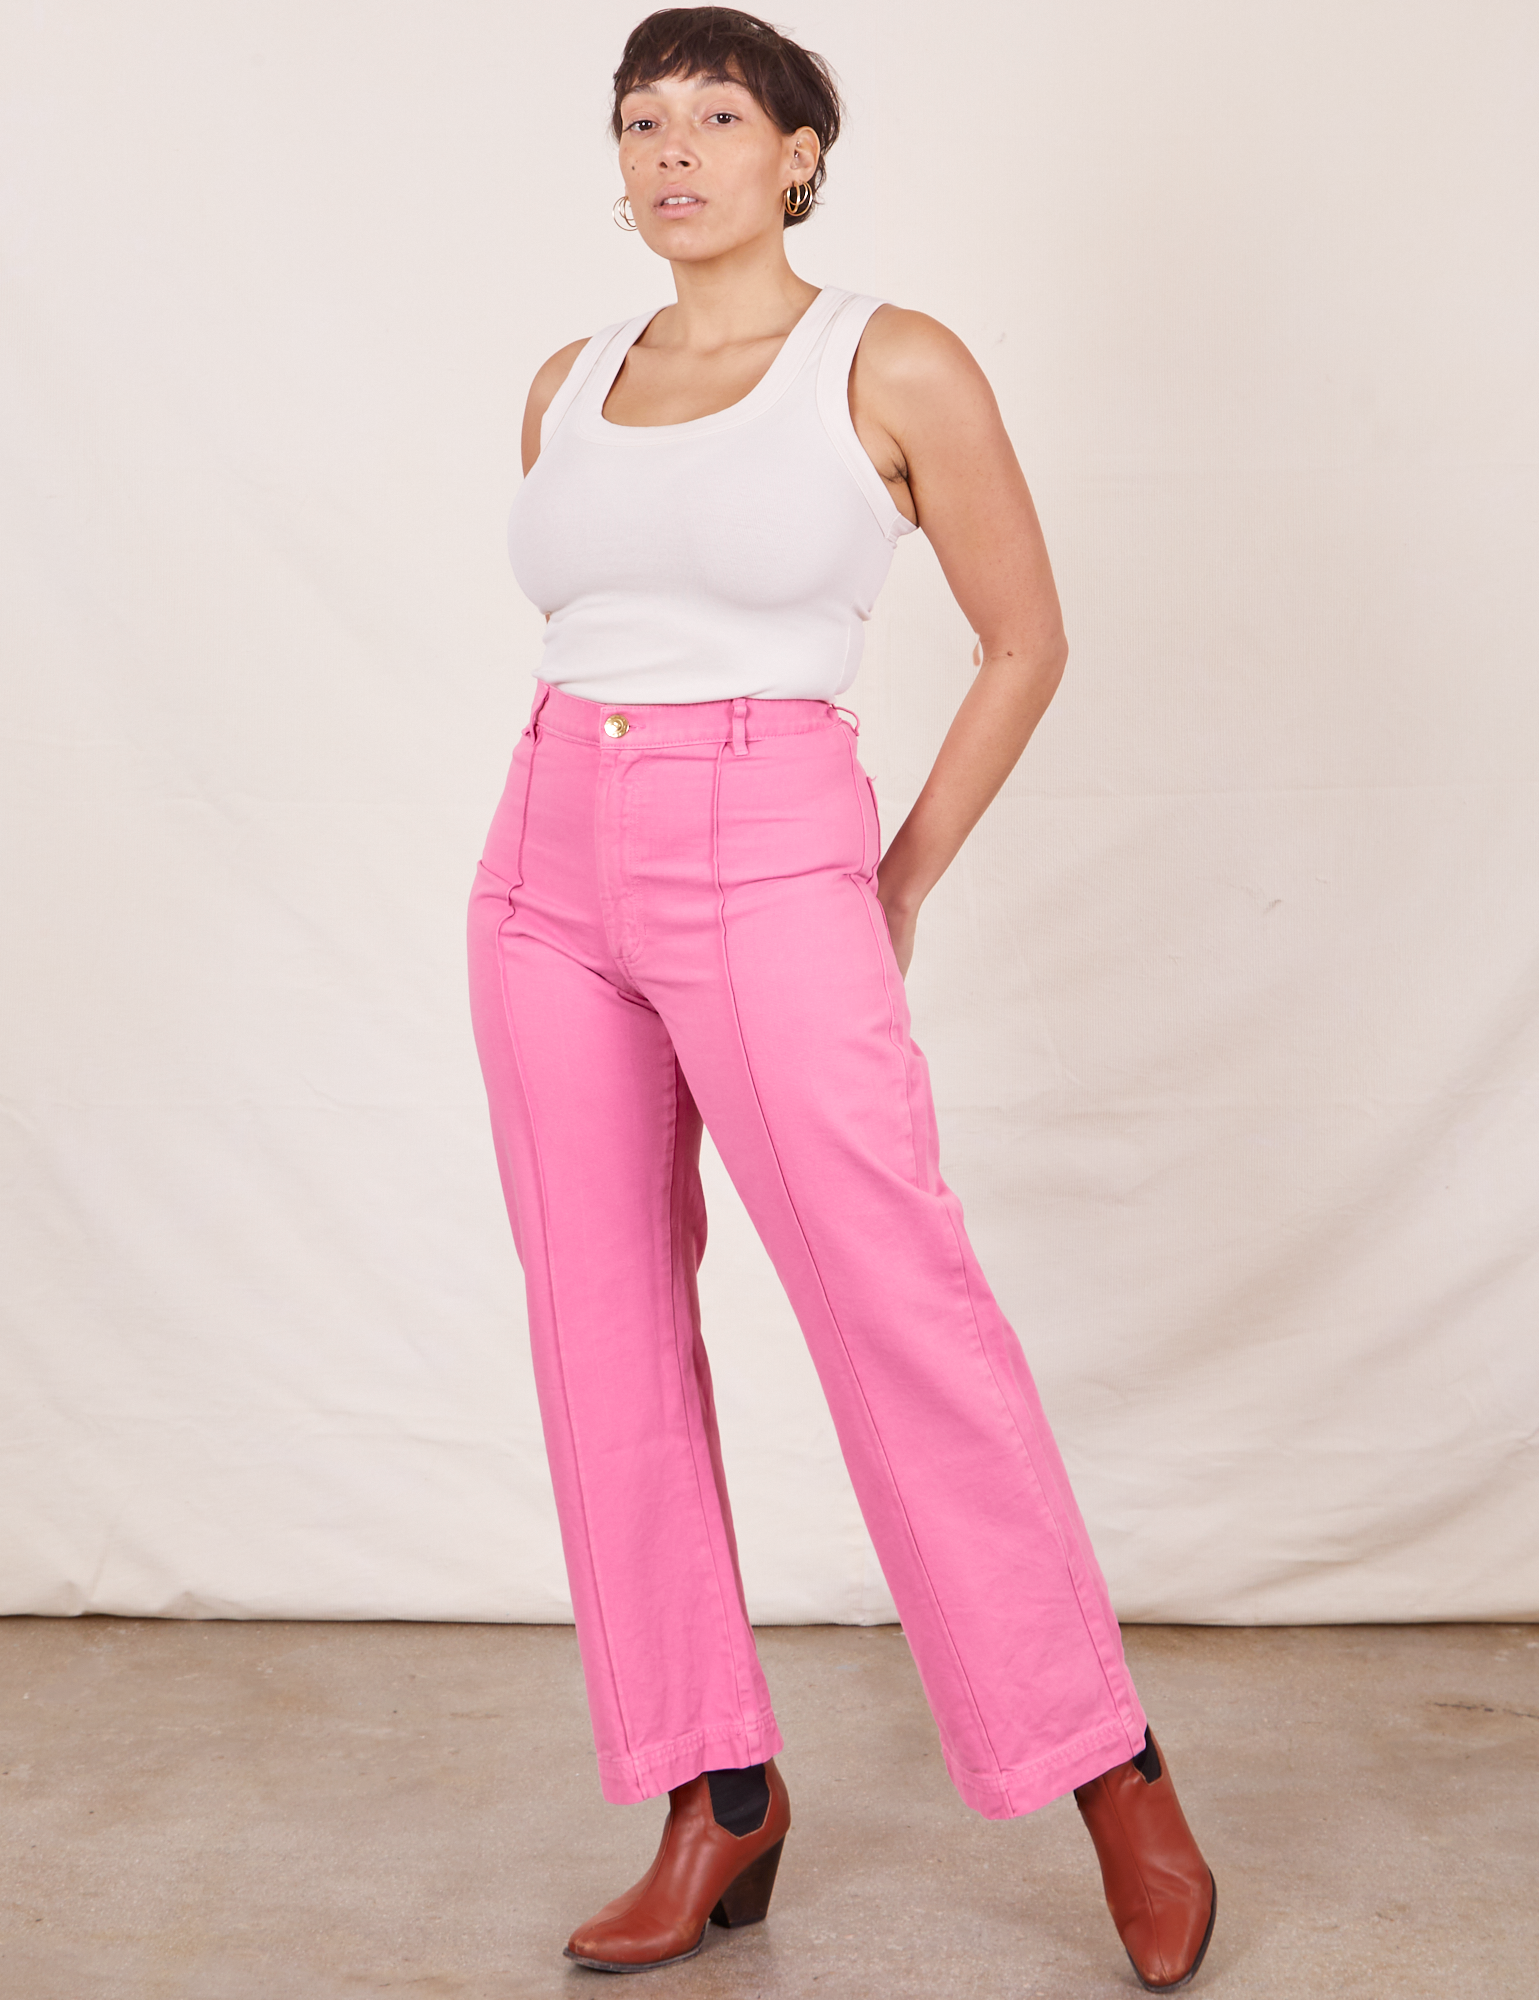 Tiara is 5&#39;4&quot; and wearing S Western Pants in Bubblegum Pink paired with Tank Top in vintage tee off-white